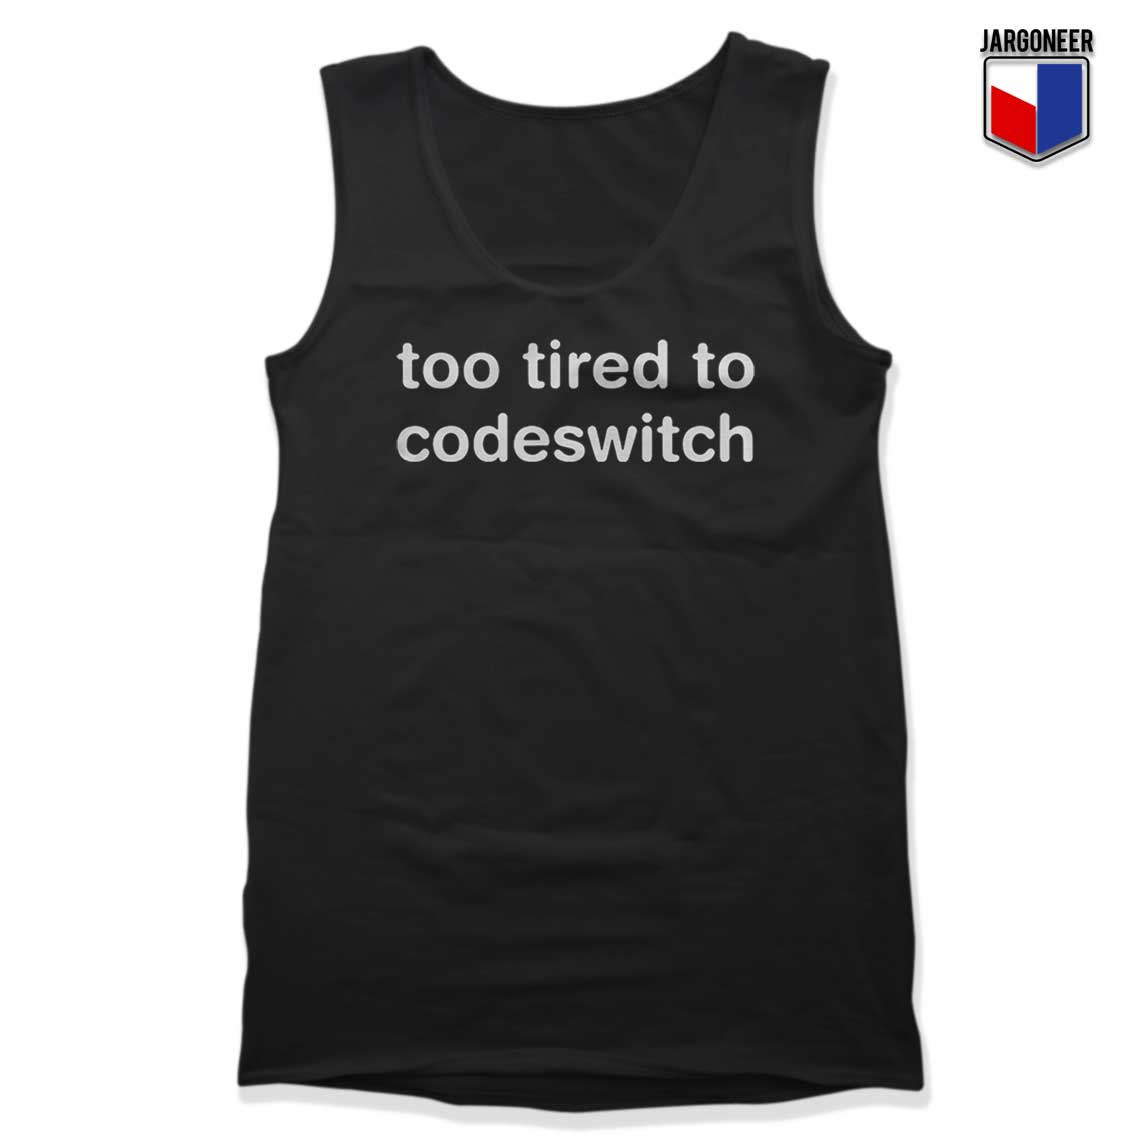 Too Tired to Codeswitch Tank Top - Shop Unique Graphic Cool Shirt Designs